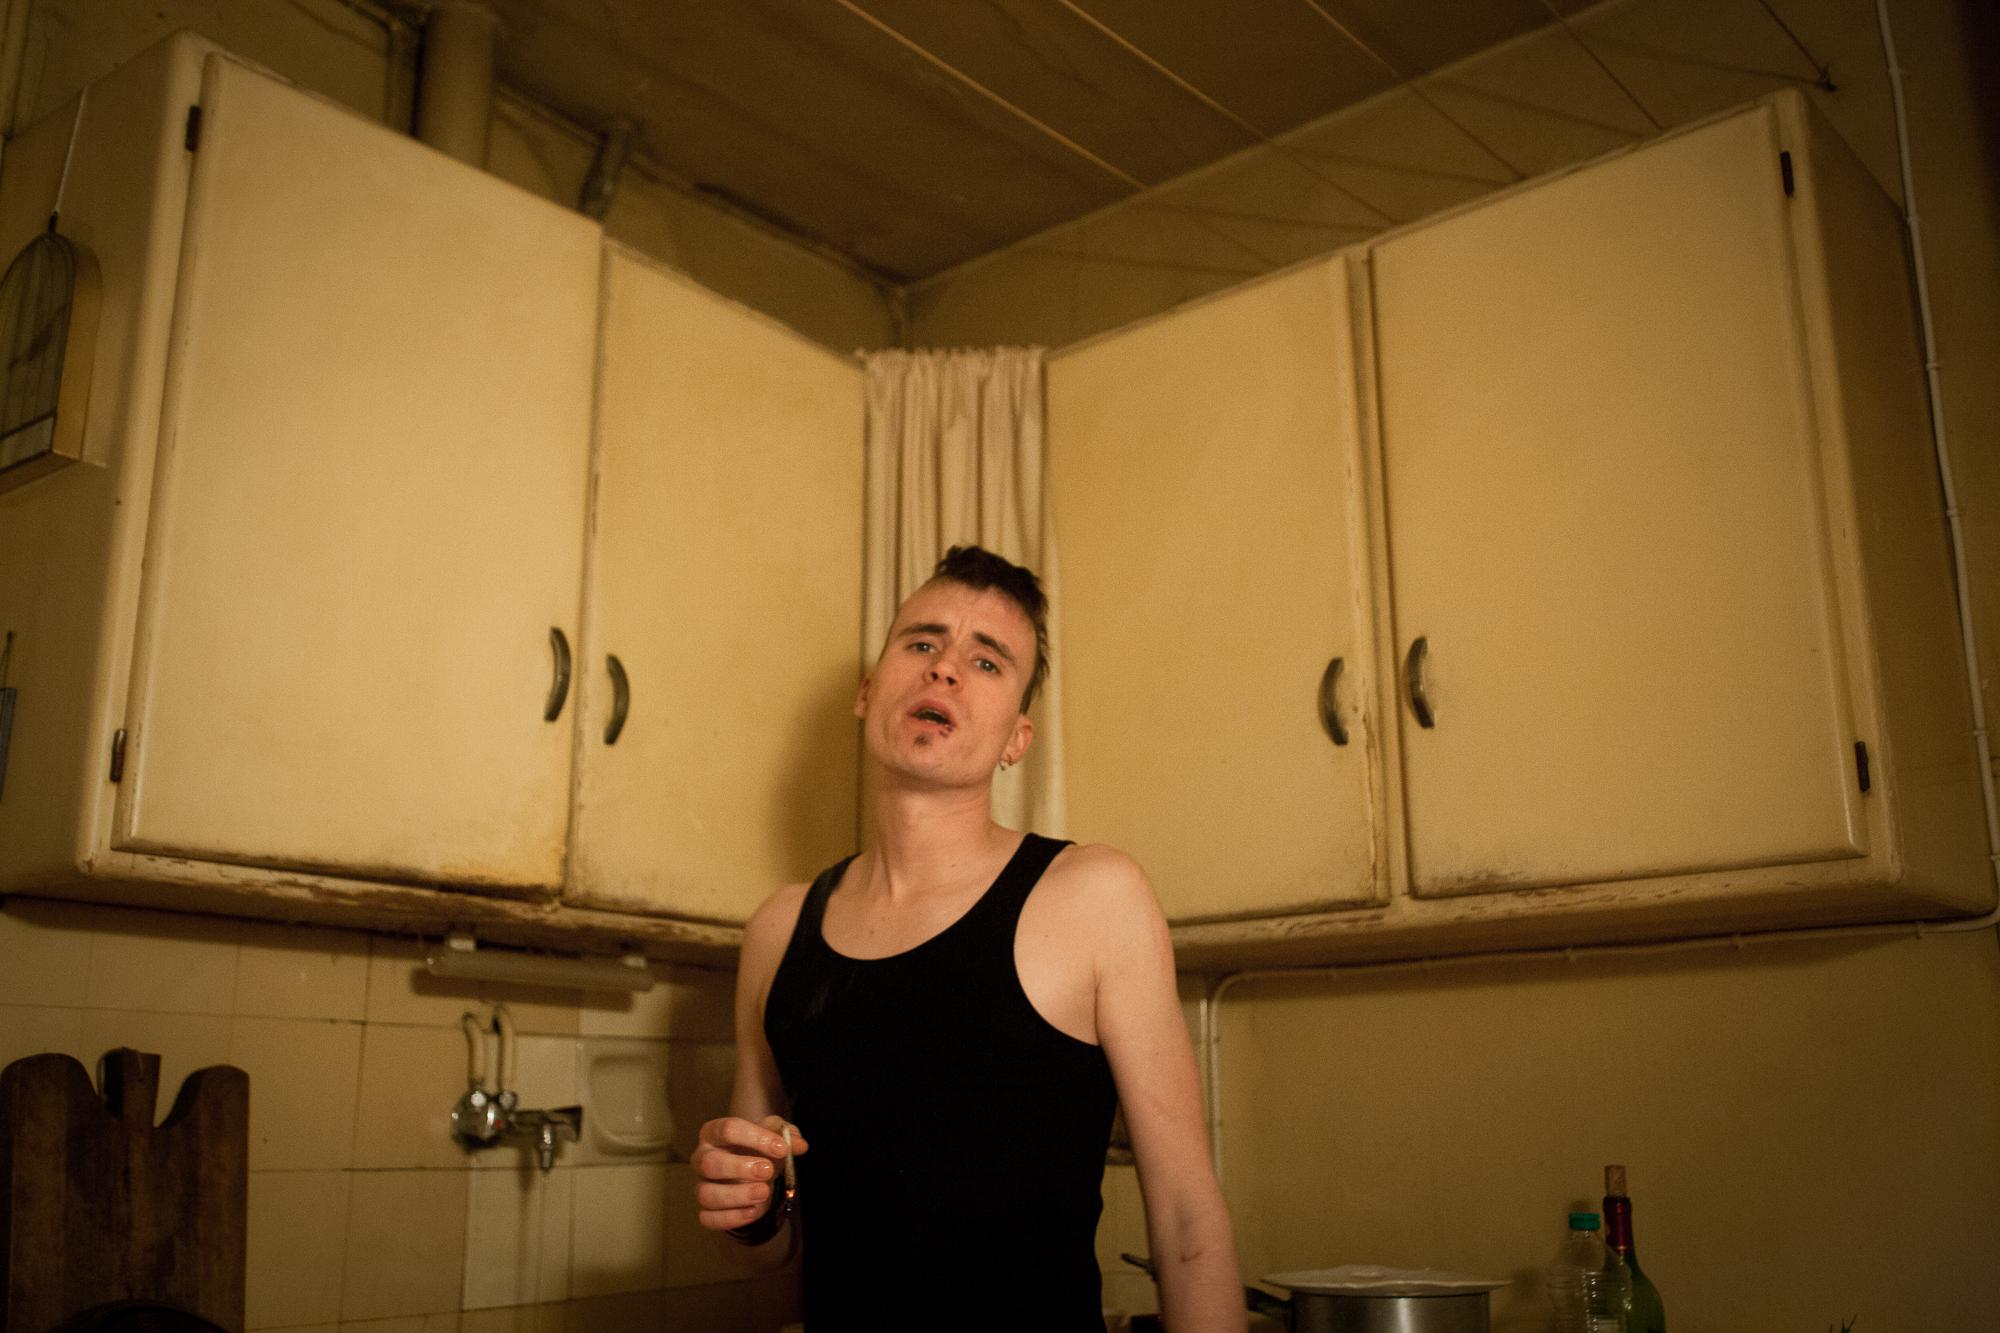 Roof investigations - Inside the Mabo squat. Titeuf in the kitchen of his flat...